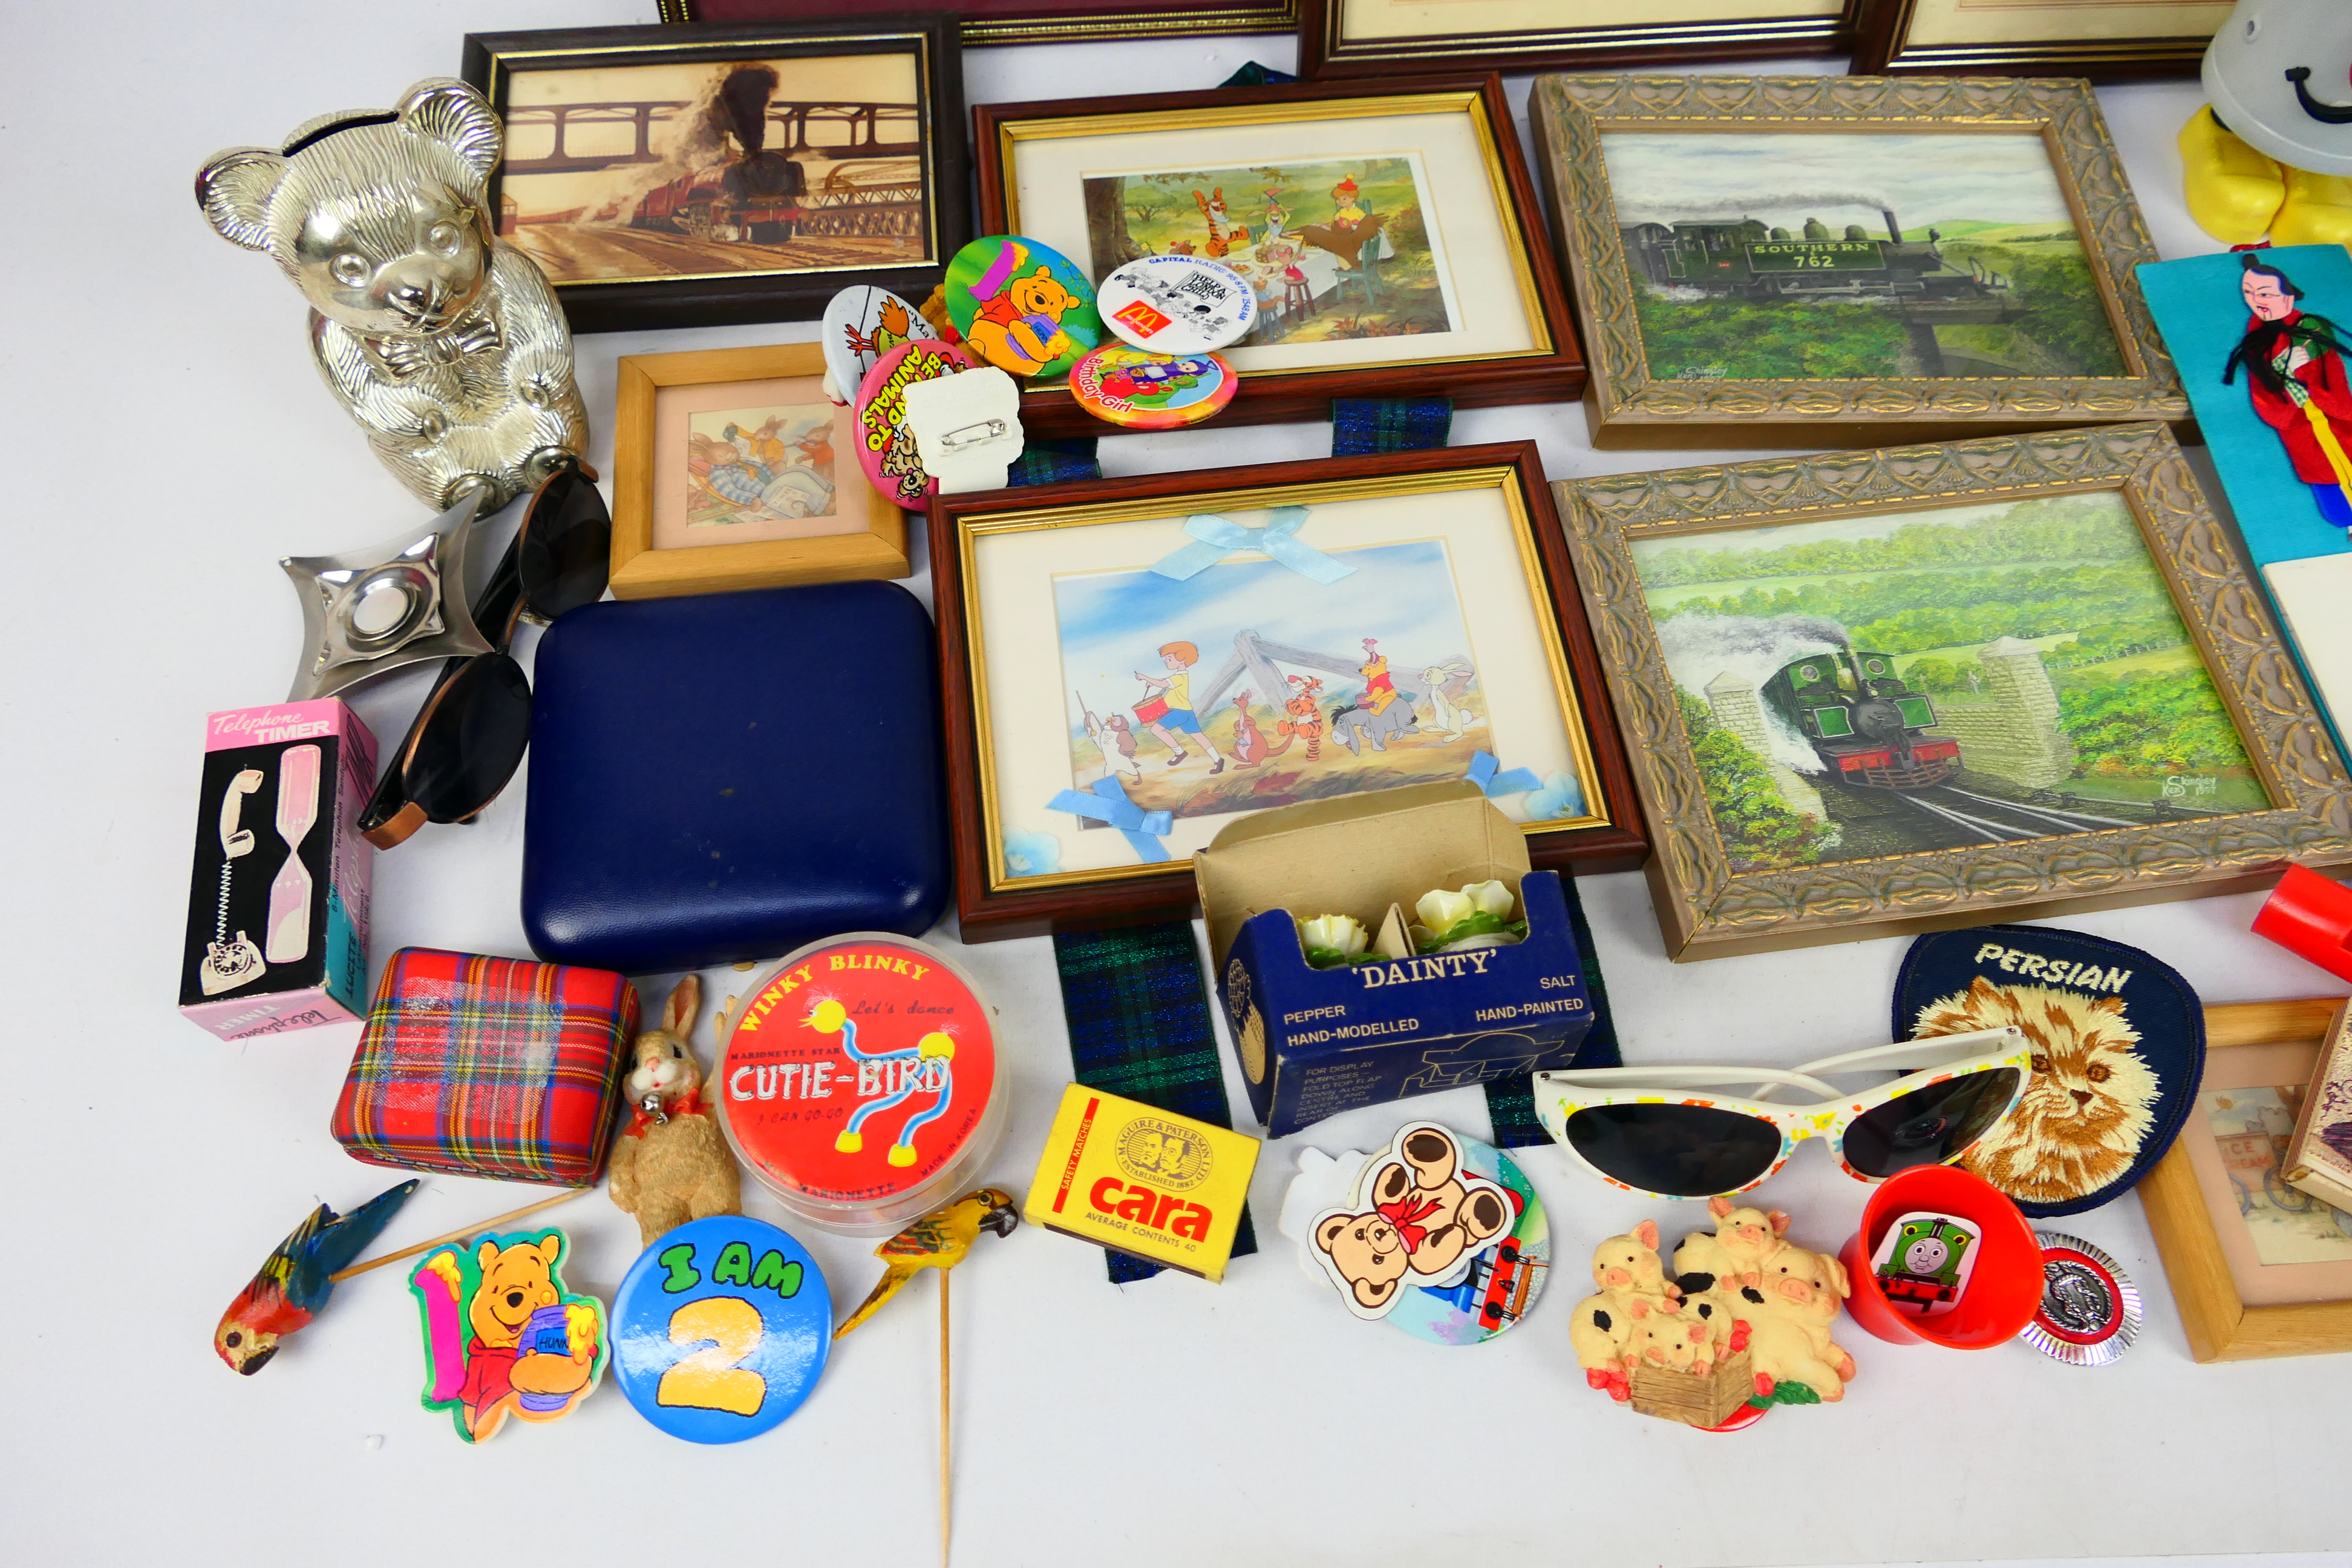 Lot to include framed pictures, badges, kaleidoscope, Dusty Bin model and other. - Image 4 of 5